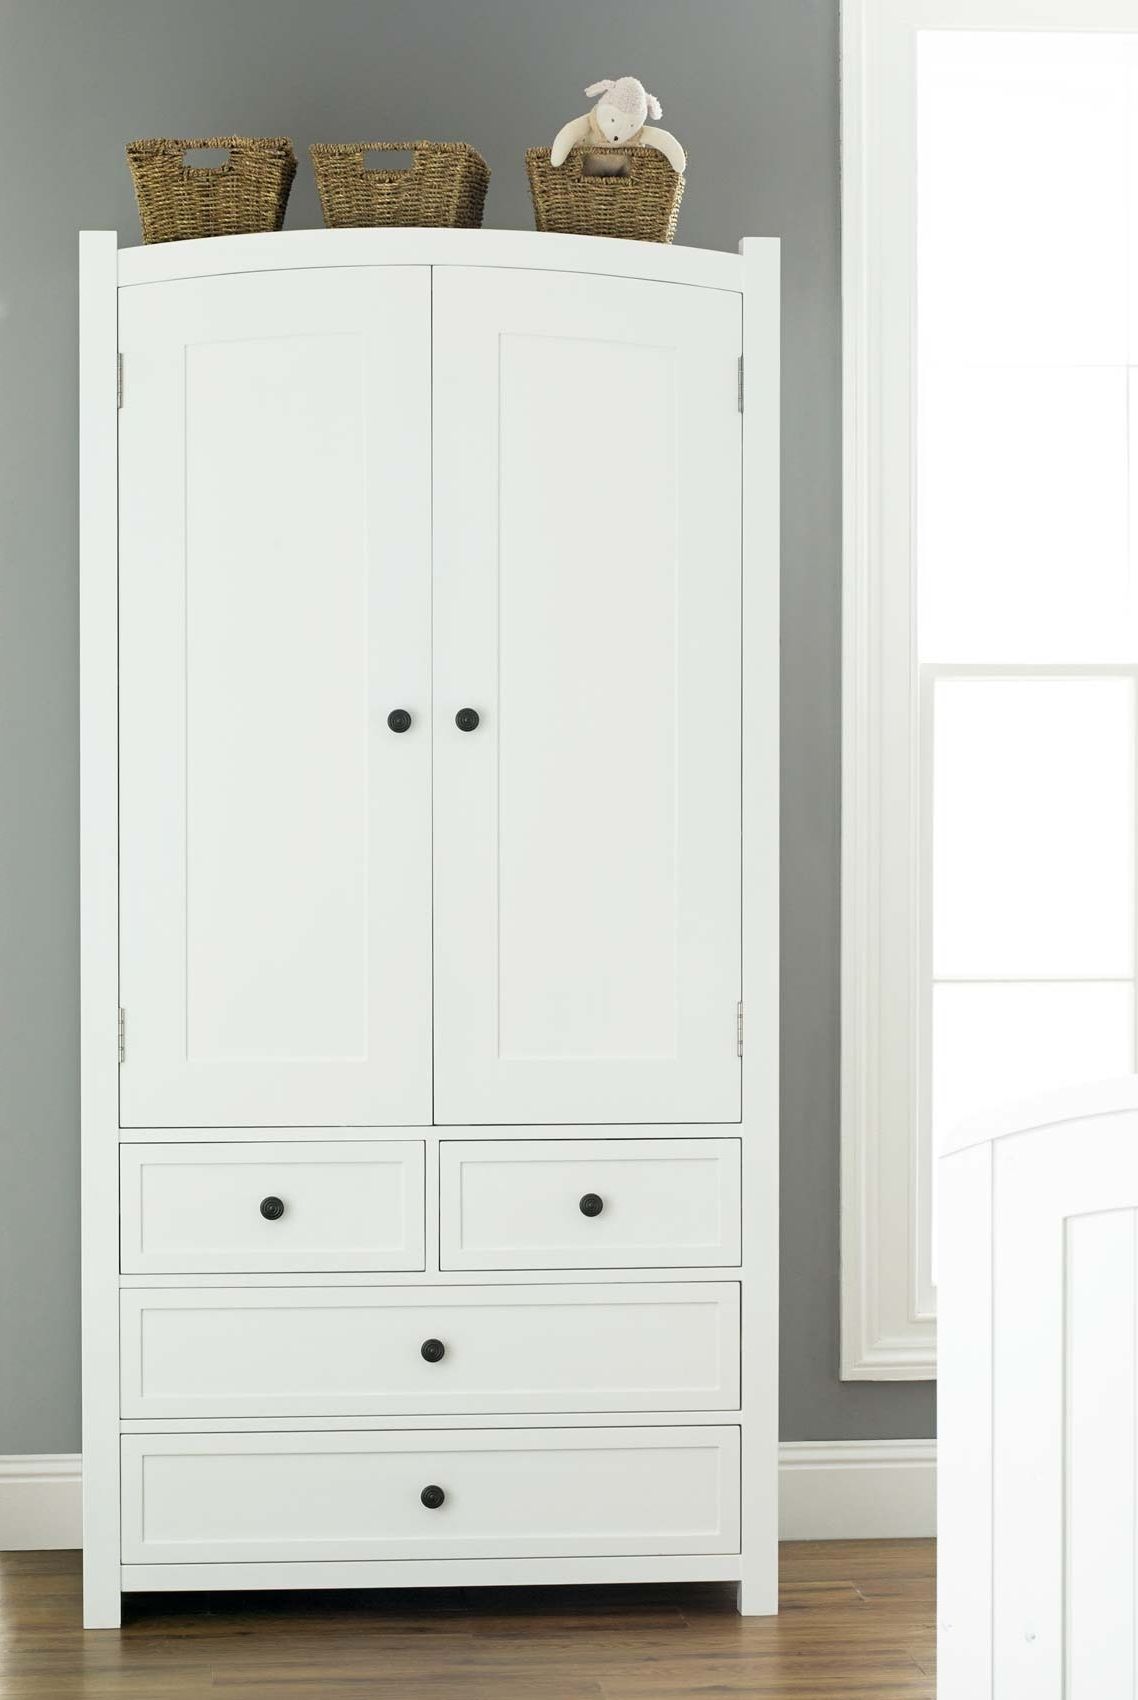 Single White Wardrobes With Drawers Intended For Popular Art Deco Solid White Painted Wooden Wardrobe With Three Pile Up (View 2 of 15)